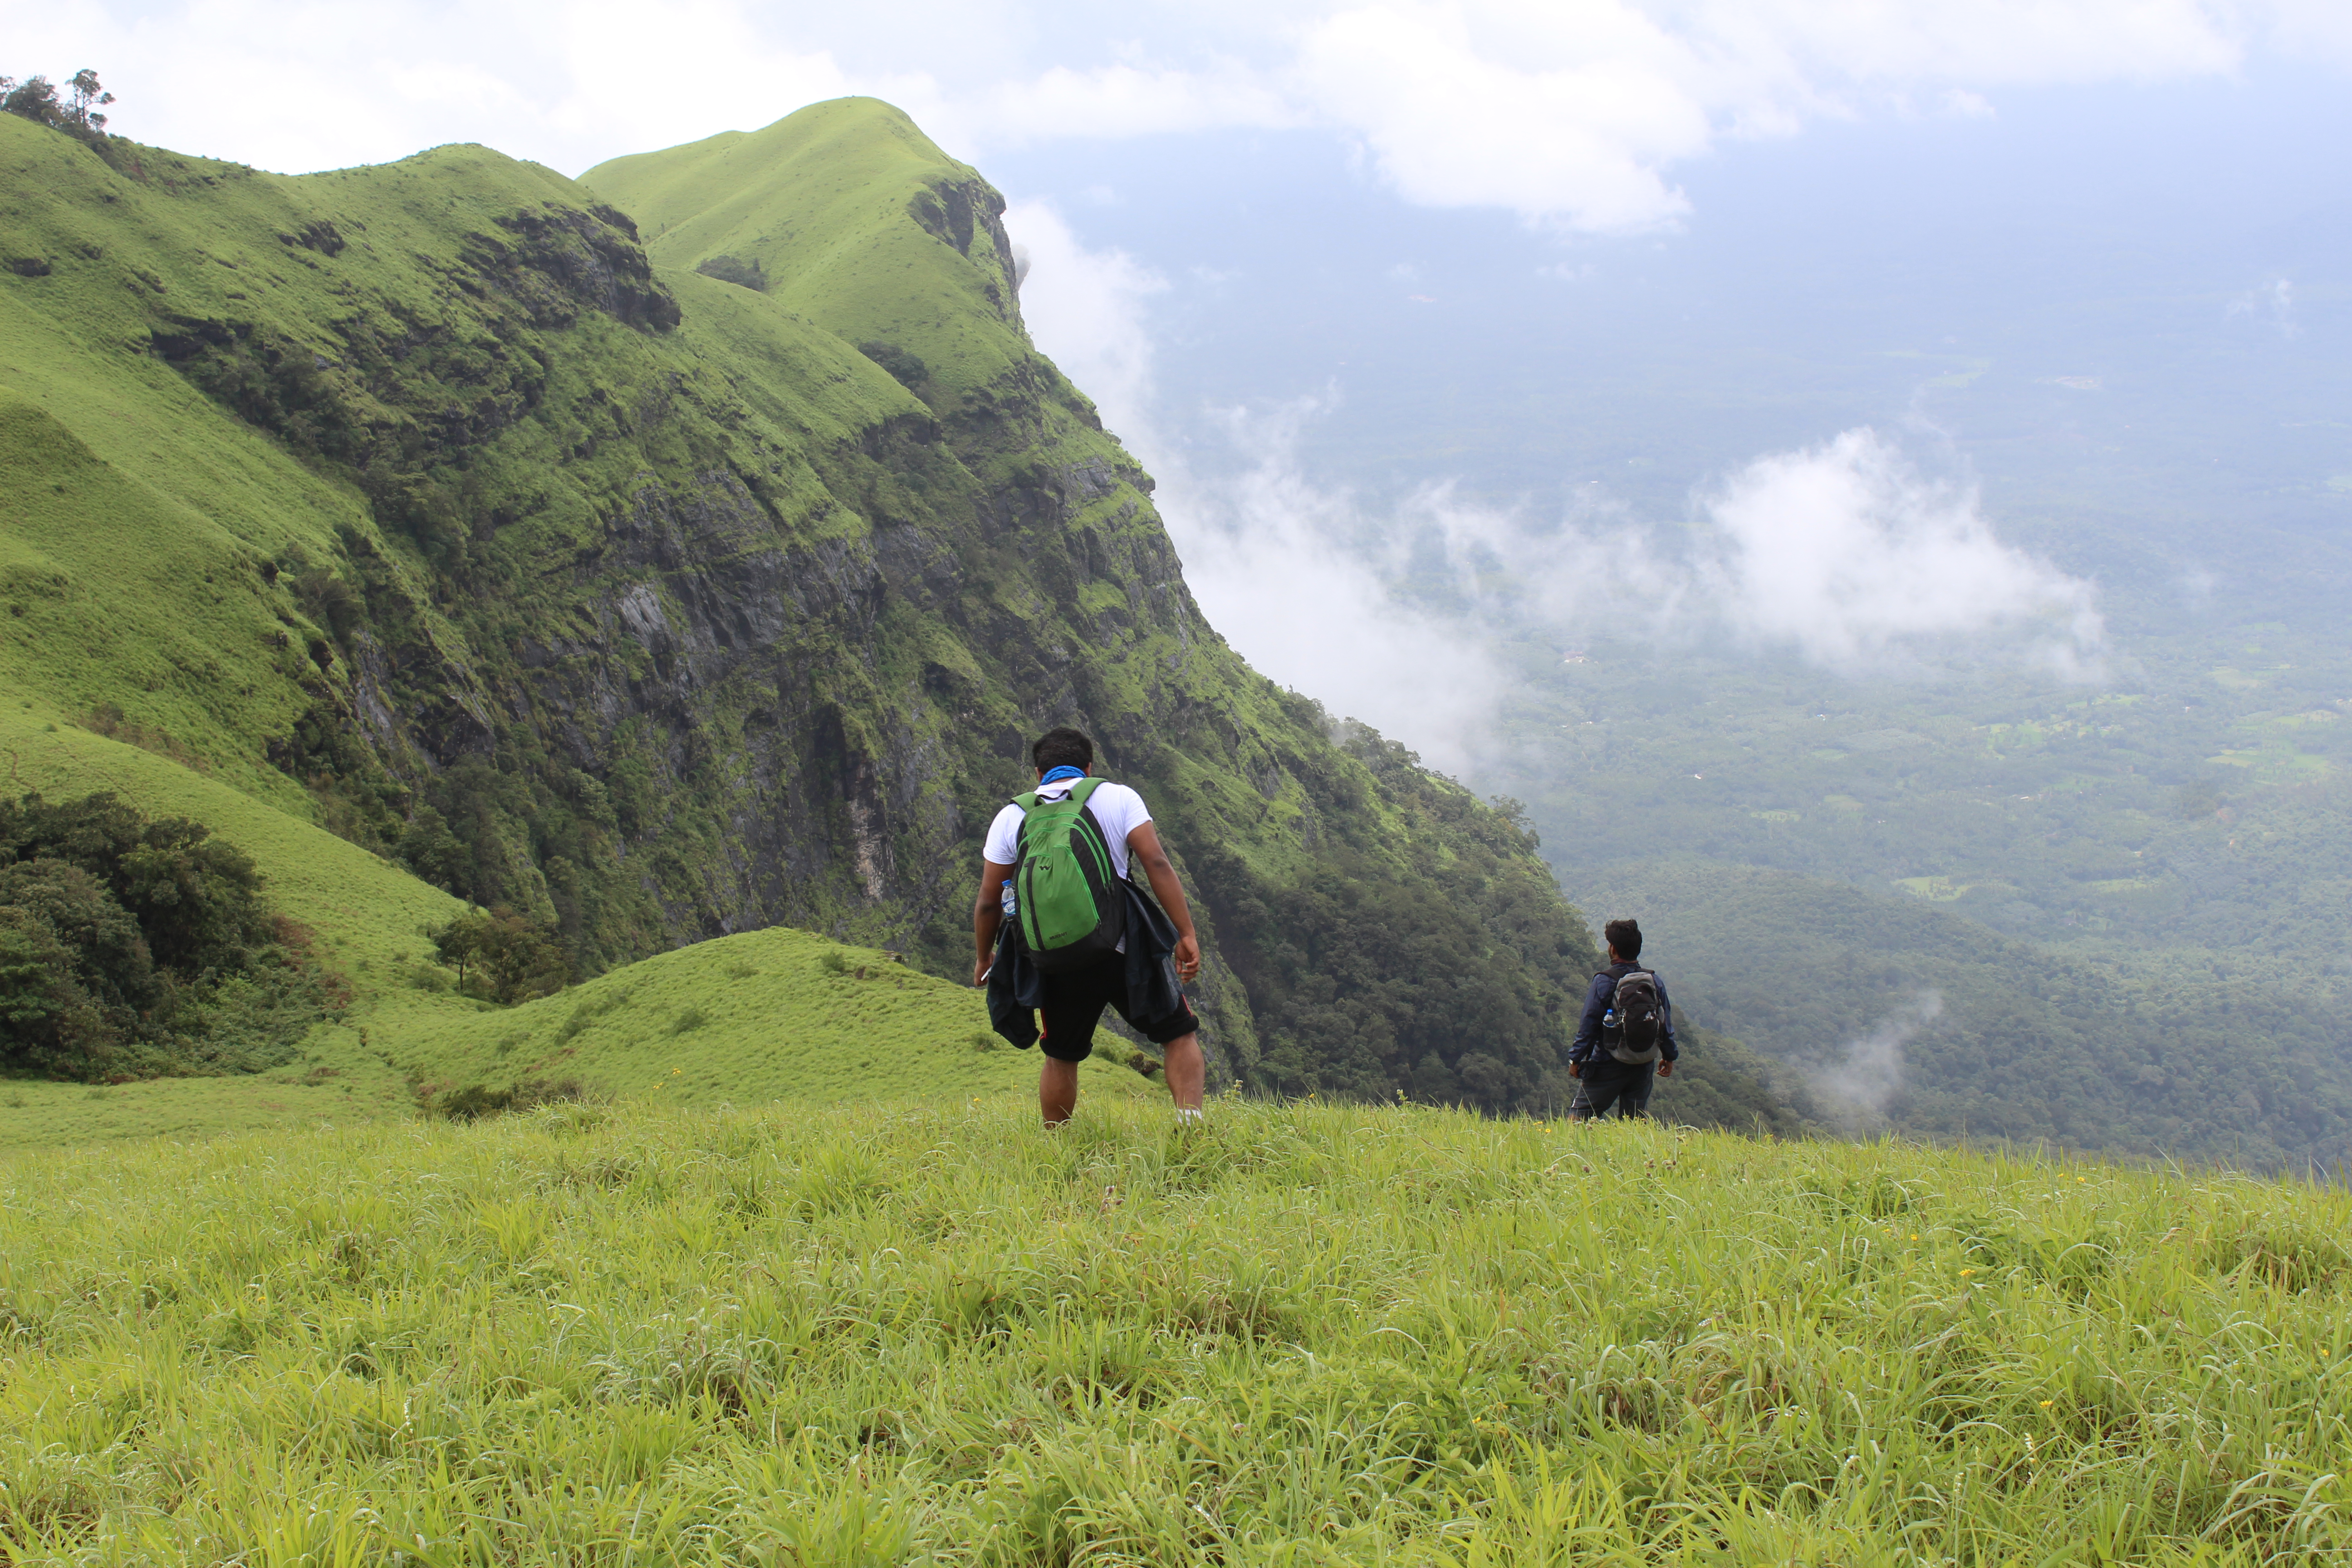 Two hikers traverse the lush, green hills of Ballarayana Durga in India, with a steep, rocky cliff in the background. The expansive view includes rolling hills and a misty valley below, creating a sense of adventure and natural beauty. The hikers' backpacks and gear add to the atmosphere of exploration in this scenic landscape.